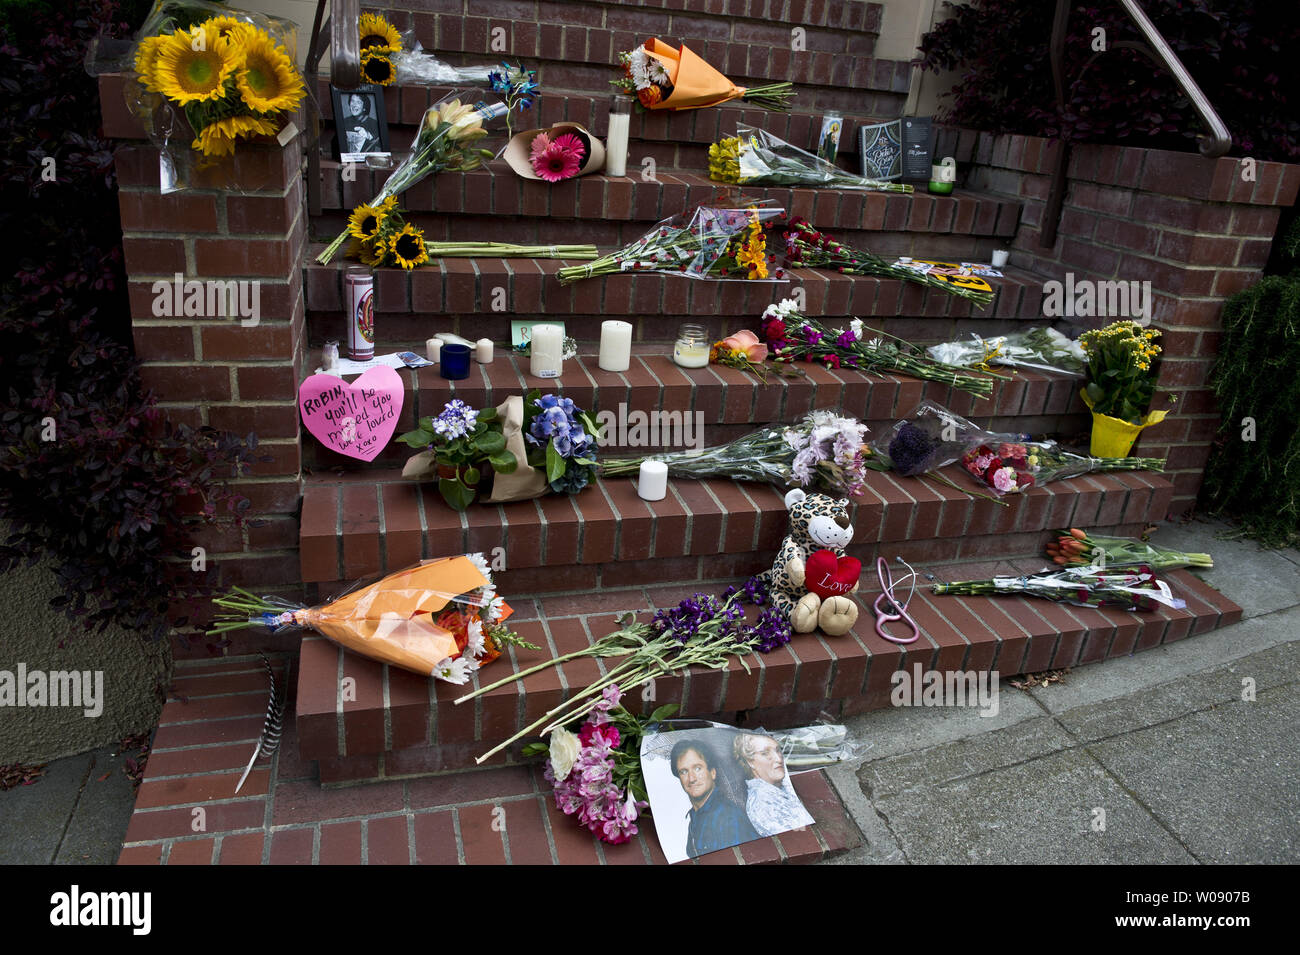 Tributes sit at a makeshift shrine to Robin Williams at the San Francisco Victorian house used in the 1993 movie 'Mrs. Doubtfire' on August 12, 2014. Williams died of asphyxia after hanging himself August 11. He was 63.     UPI/Terry Schmitt Stock Photo